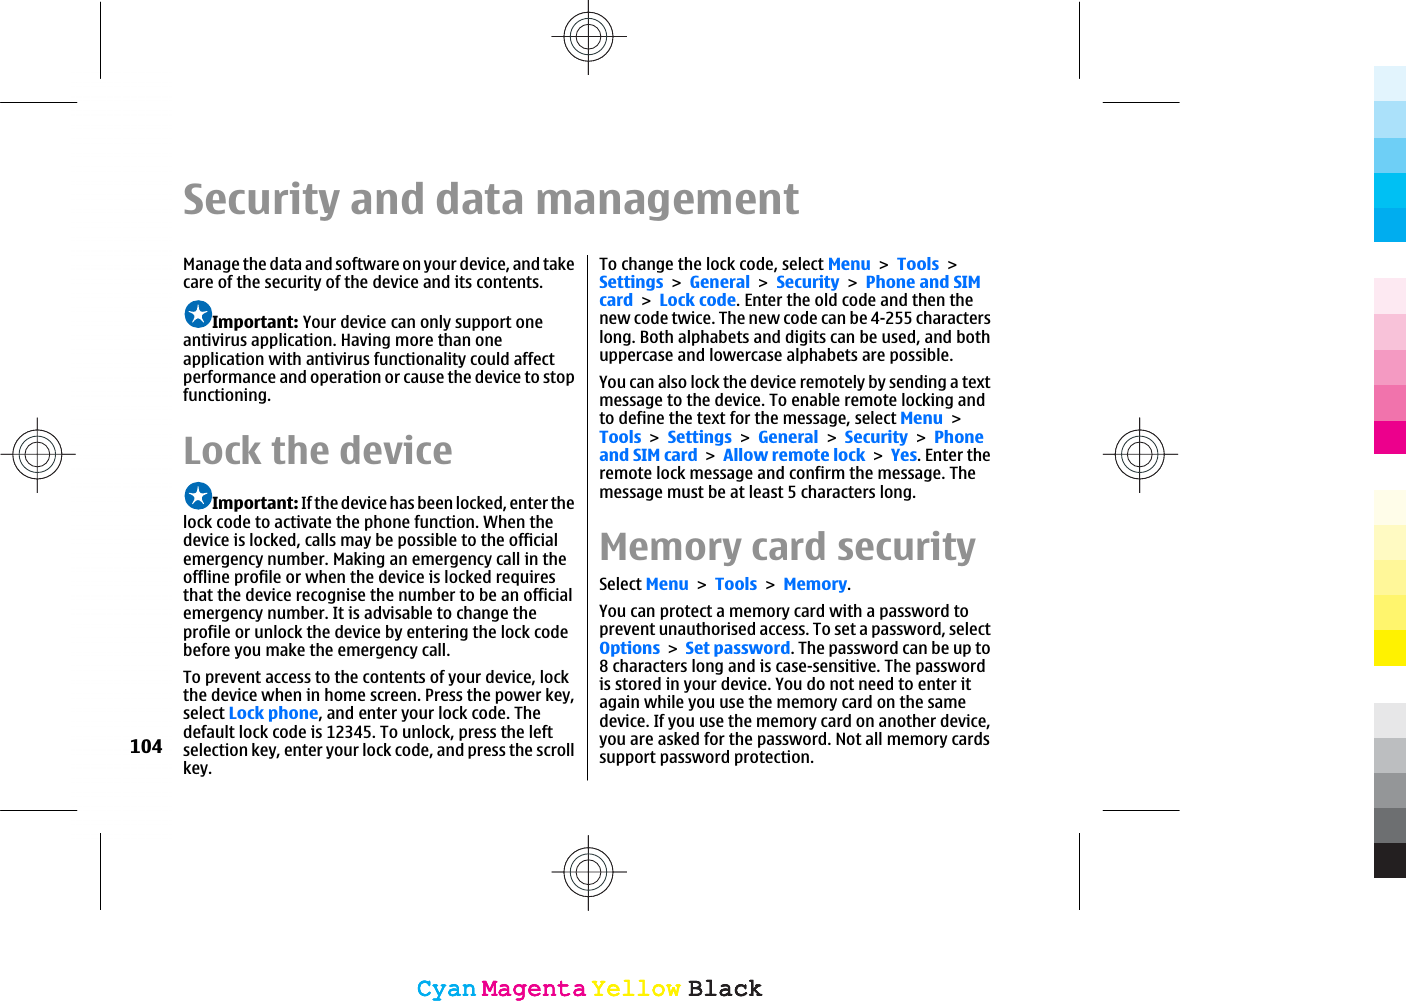 Security and data managementManage the data and software on your device, and takecare of the security of the device and its contents.Important: Your device can only support oneantivirus application. Having more than oneapplication with antivirus functionality could affectperformance and operation or cause the device to stopfunctioning.Lock the deviceImportant: If the device has been locked, enter thelock code to activate the phone function. When thedevice is locked, calls may be possible to the officialemergency number. Making an emergency call in theoffline profile or when the device is locked requiresthat the device recognise the number to be an officialemergency number. It is advisable to change theprofile or unlock the device by entering the lock codebefore you make the emergency call.To prevent access to the contents of your device, lockthe device when in home screen. Press the power key,select Lock phone, and enter your lock code. Thedefault lock code is 12345. To unlock, press the leftselection key, enter your lock code, and press the scrollkey.To change the lock code, select MenuToolsSettingsGeneralSecurityPhone and SIMcardLock code. Enter the old code and then thenew code twice. The new code can be 4-255 characterslong. Both alphabets and digits can be used, and bothuppercase and lowercase alphabets are possible.You can also lock the device remotely by sending a textmessage to the device. To enable remote locking andto define the text for the message, select MenuToolsSettingsGeneralSecurityPhoneand SIM cardAllow remote lockYes. Enter theremote lock message and confirm the message. Themessage must be at least 5 characters long.Memory card securitySelect MenuToolsMemory.You can protect a memory card with a password toprevent unauthorised access. To set a password, selectOptionsSet password. The password can be up to8 characters long and is case-sensitive. The passwordis stored in your device. You do not need to enter itagain while you use the memory card on the samedevice. If you use the memory card on another device,you are asked for the password. Not all memory cardssupport password protection.104CyanCyanMagentaMagentaYellowYellowBlackBlackCyanCyanMagentaMagentaYellowYellowBlackBlack